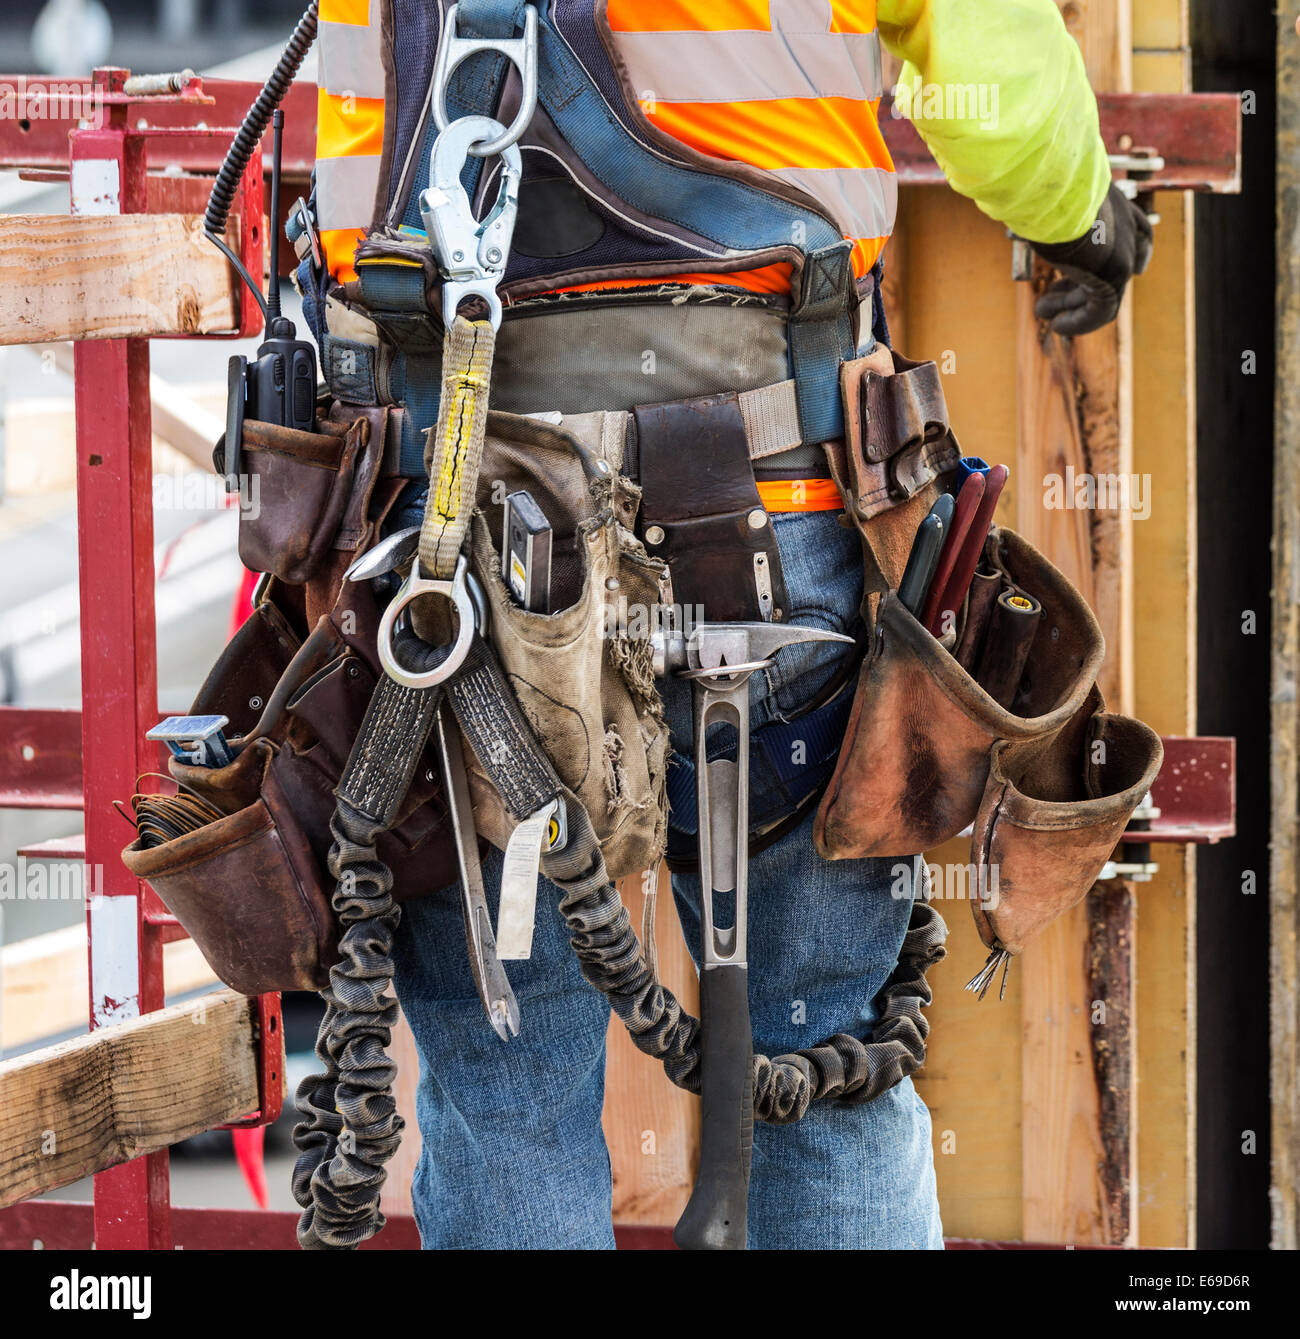 Young Worker wearing tool belt at construction site Banque D'Images